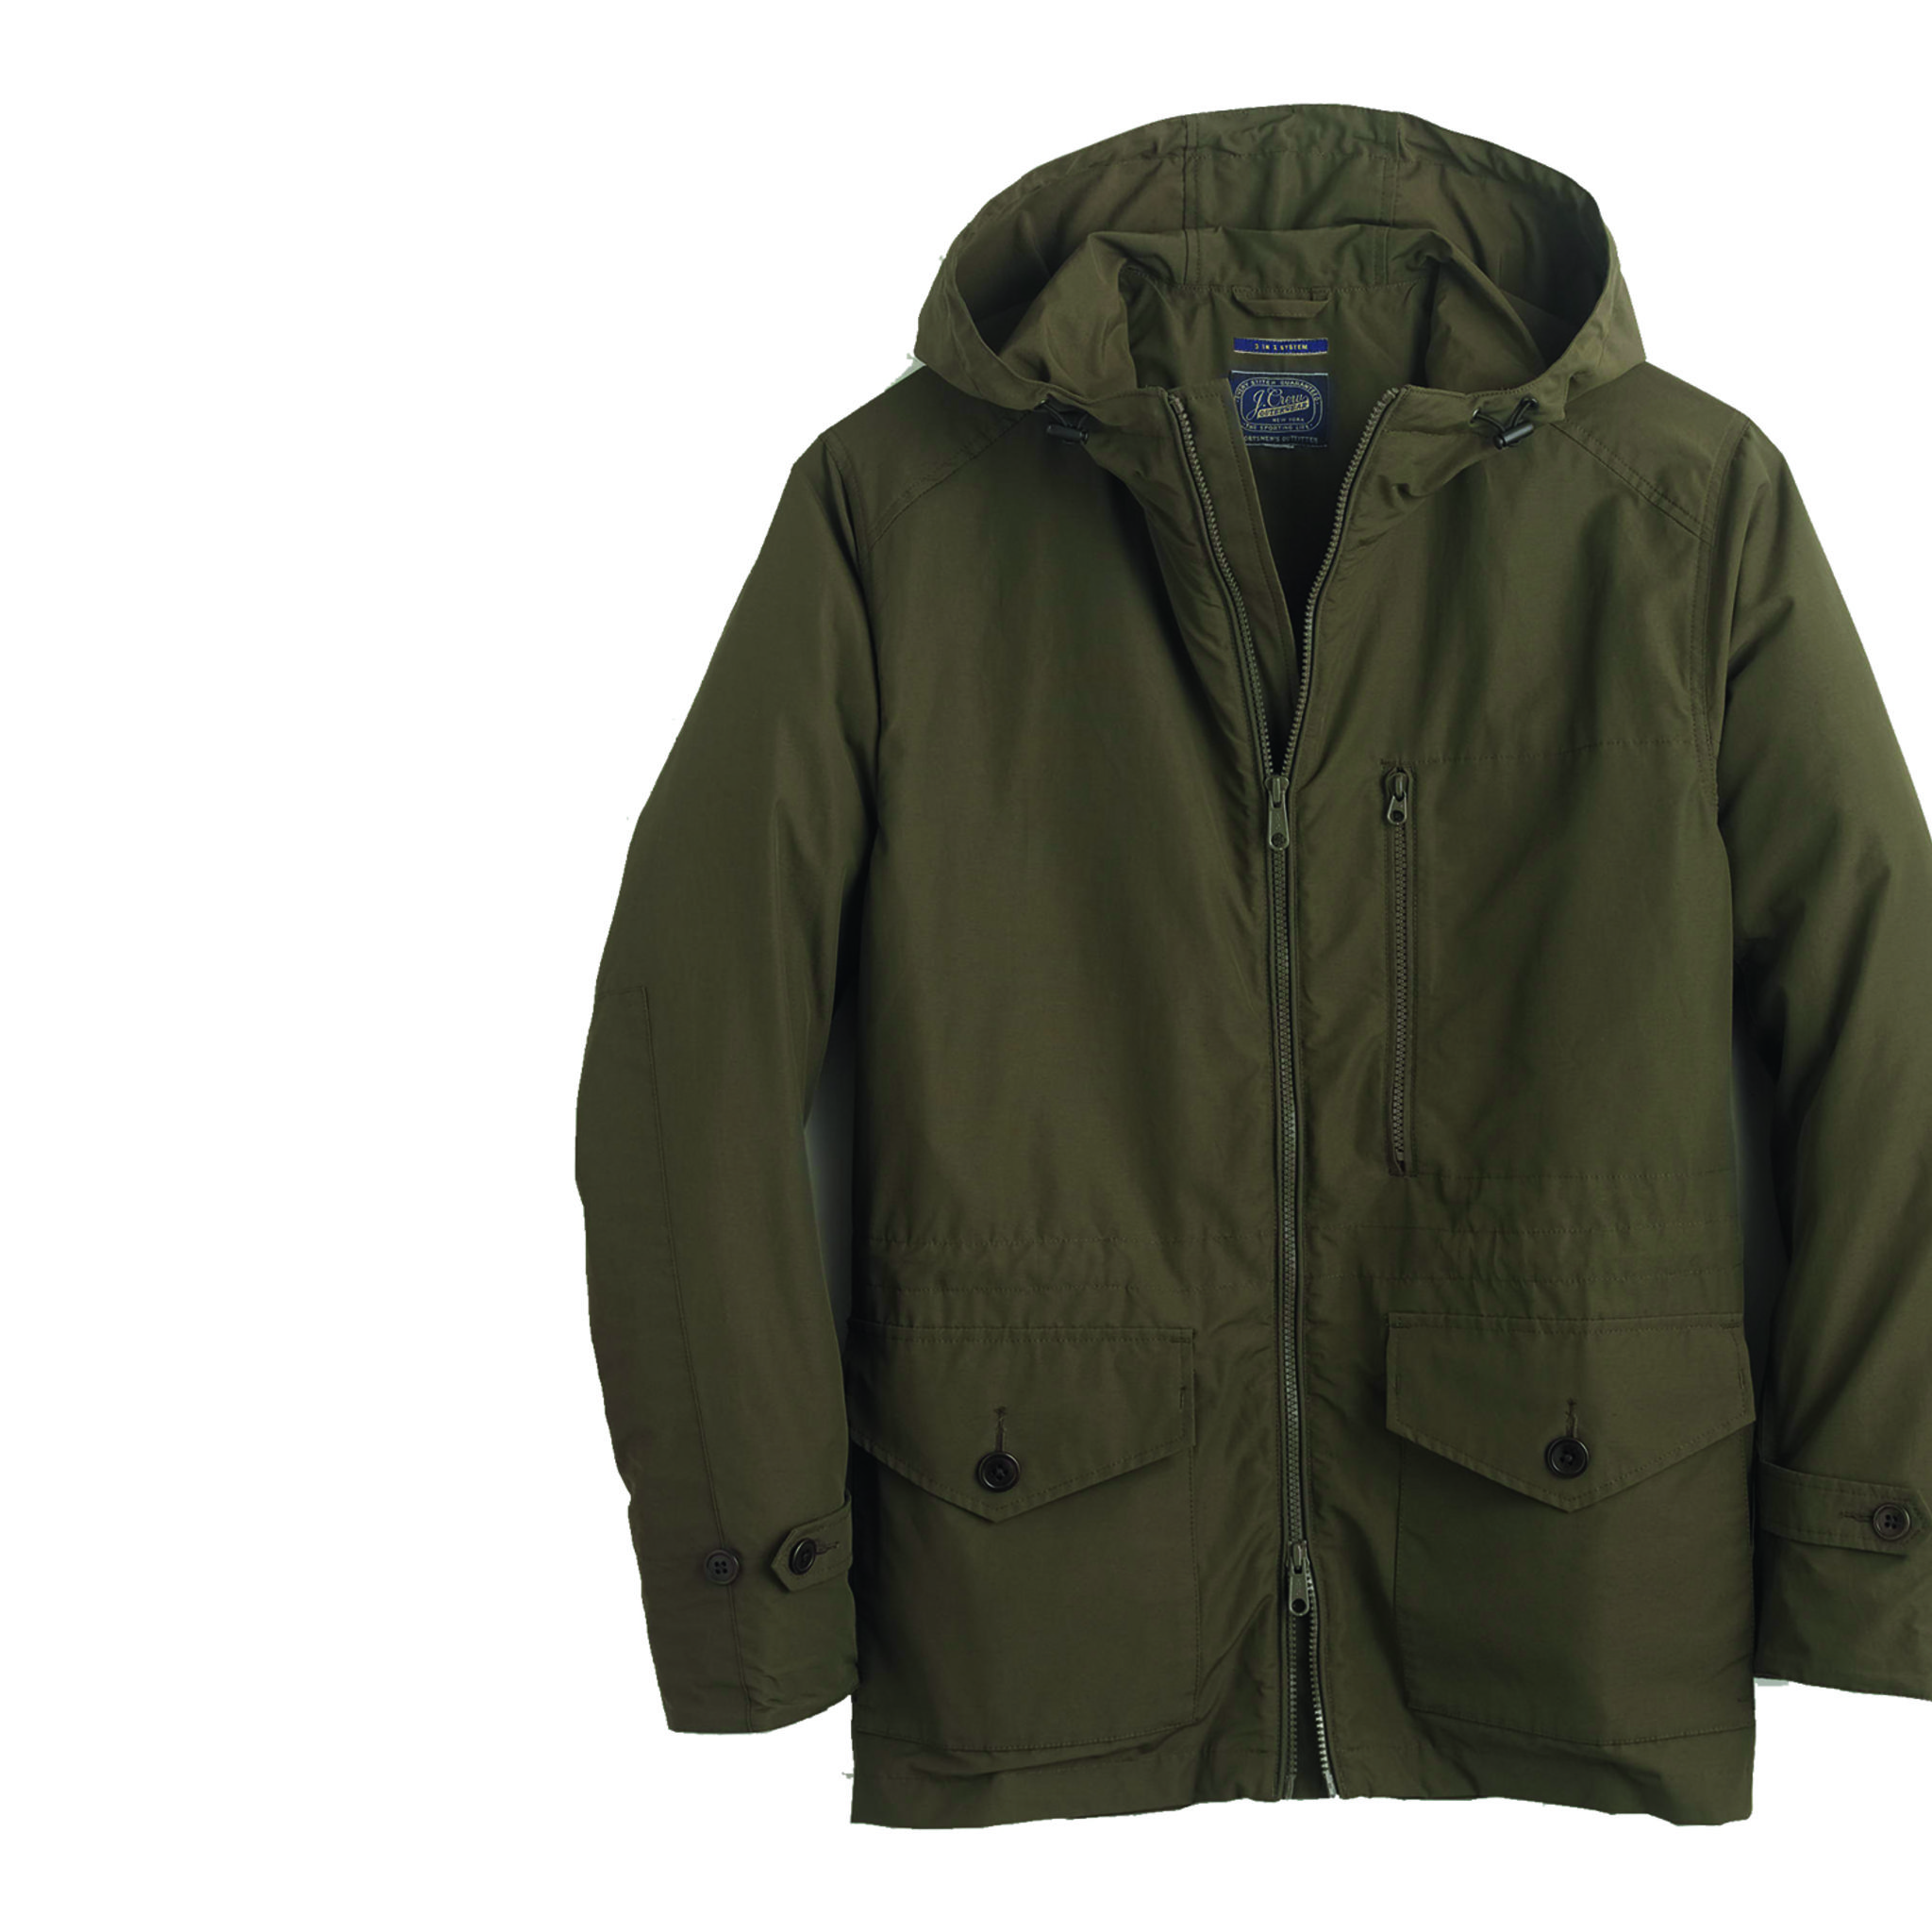 Coats Under £300 To Get You Through Winter